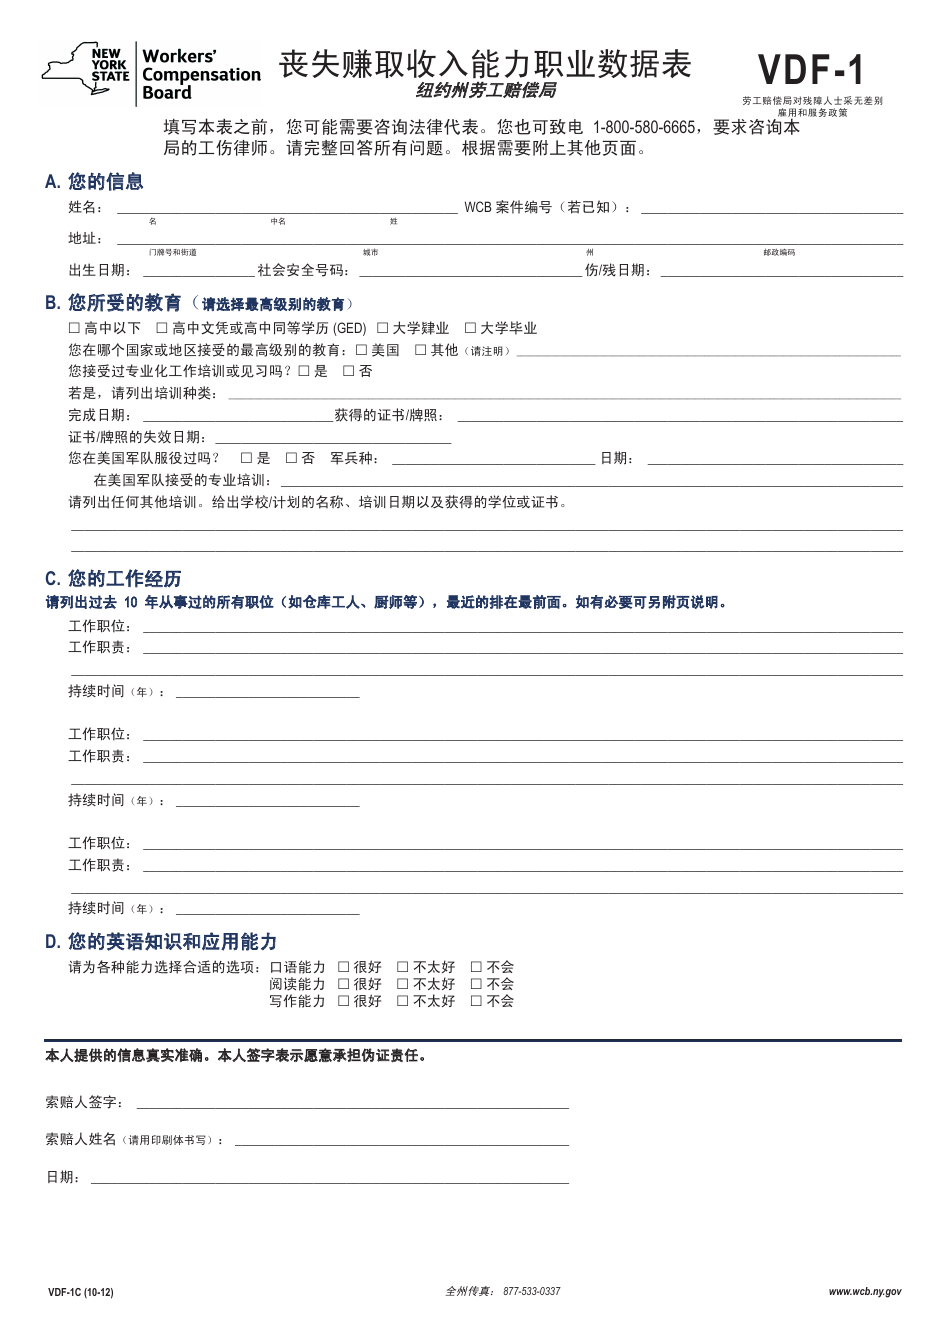 Form VDF-1 Loss of Wage Earning Capacity Vocational Data Form - New York (Chinese), Page 1